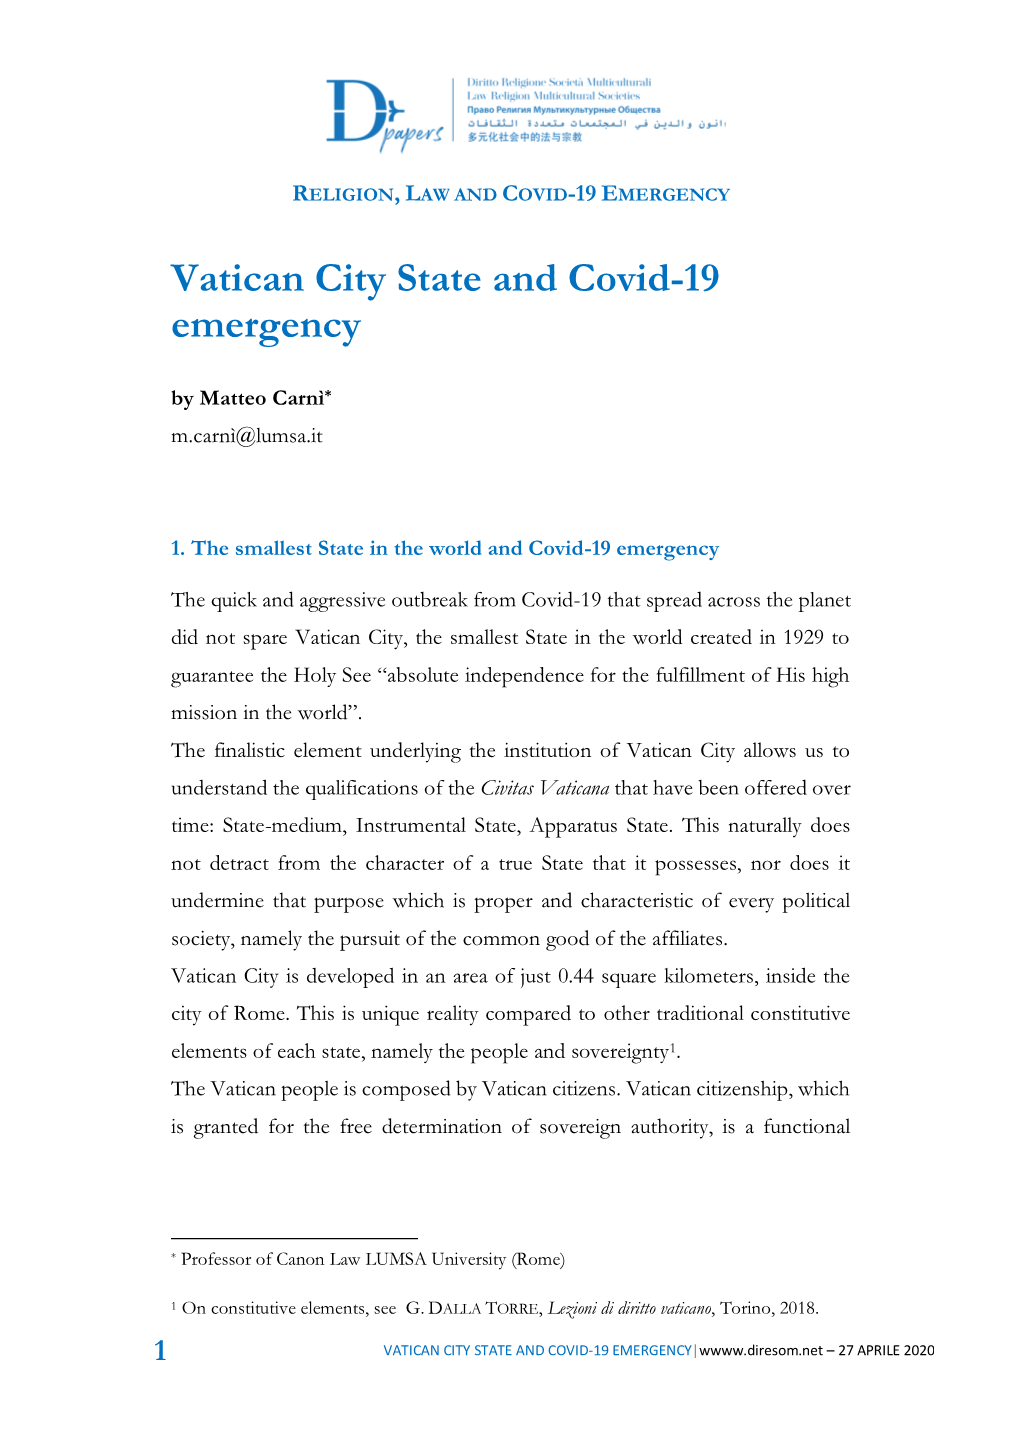 VATICAN CITY STATE and COVID-19 EMERGENCY|W – 27 APRILE 2020